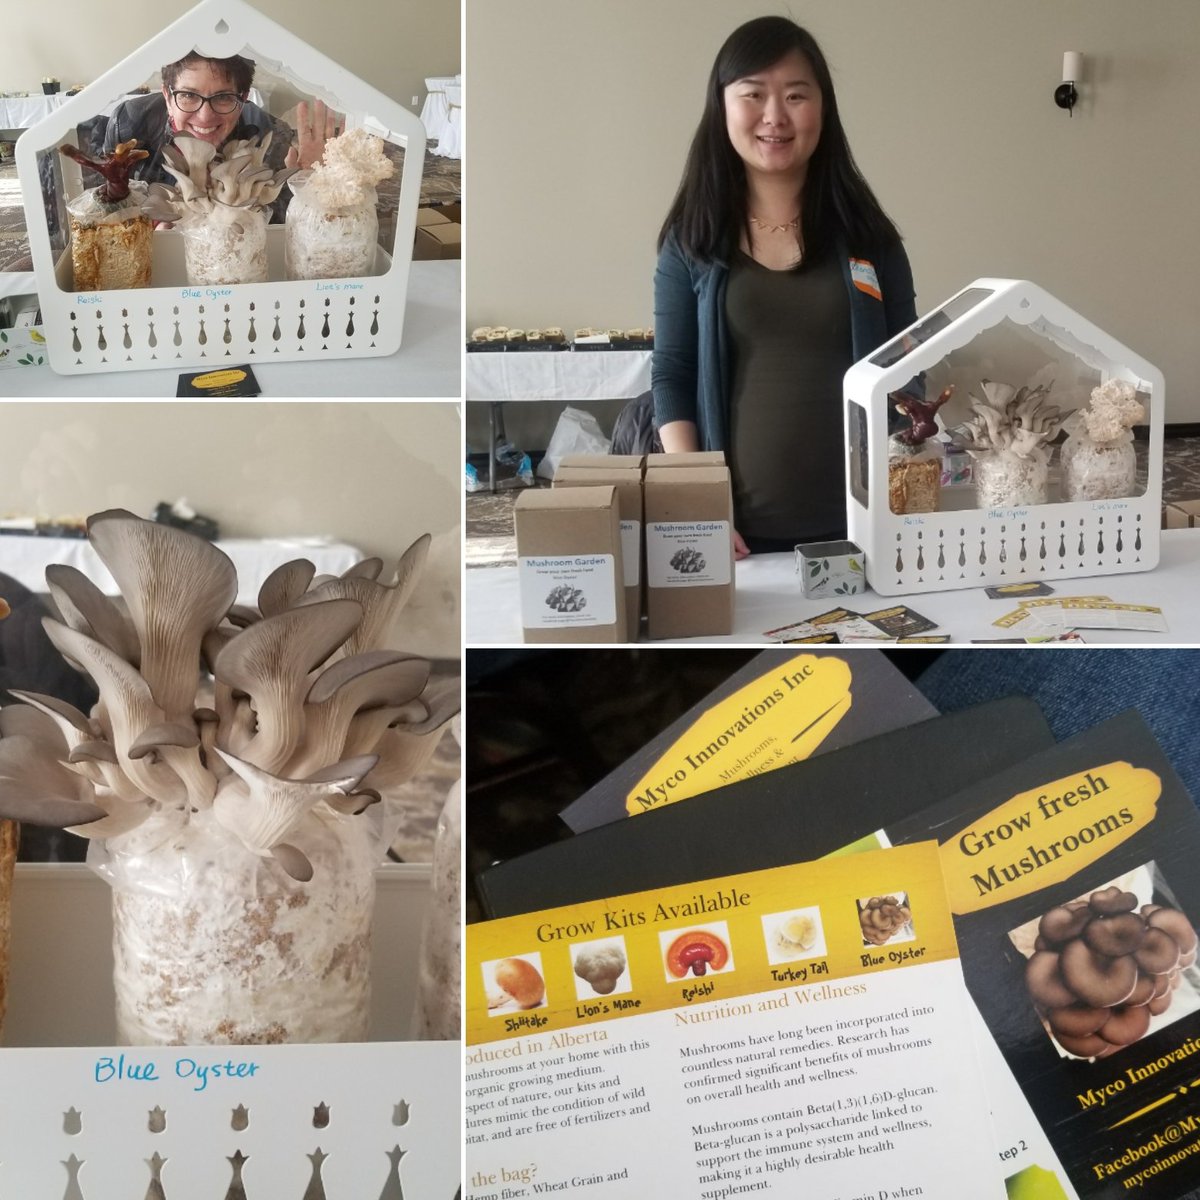 Meet Chanchan from #PlanetMushrooms #MycoInnovations She's one cool lady and the mushroom maven behind this gr8 home kit. Who wants to grow some mushrooms?!! 🍄🌱 #growfresh #coolsuppliers #growerday #Evergro @1BIOBEST @Canbiobest #growclean #learnit